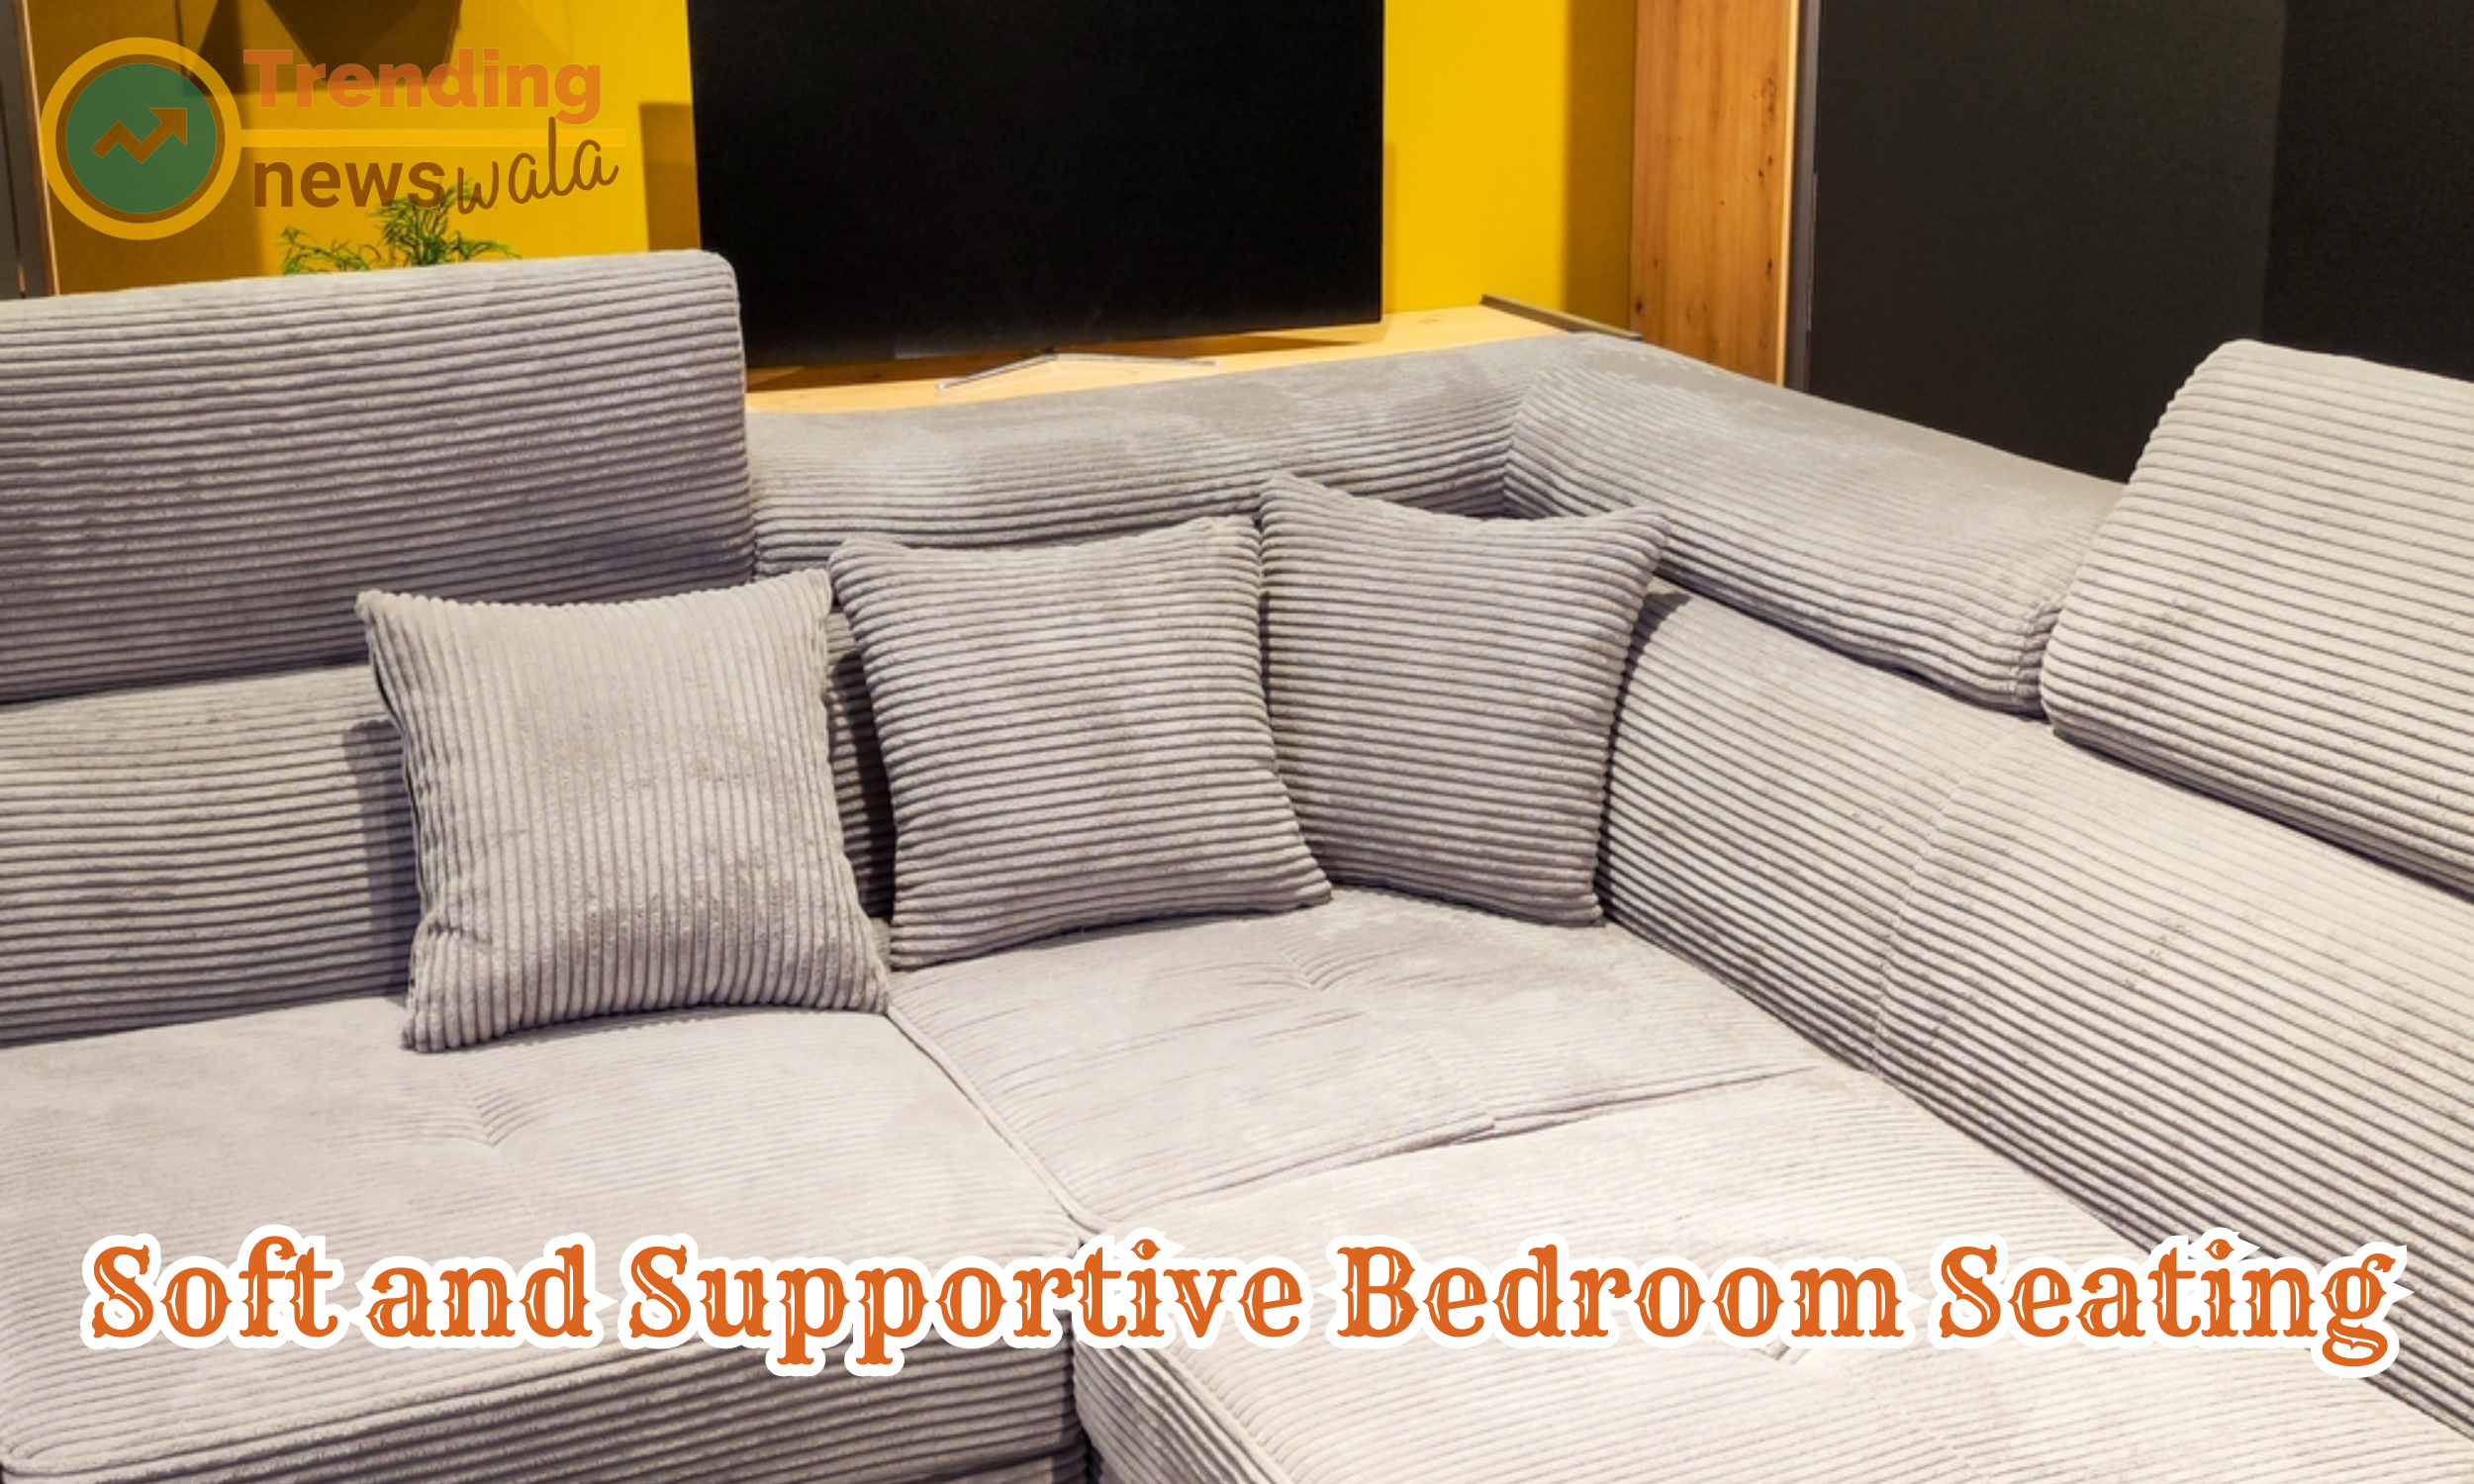 What Is The Most Comfortable Bedroom Furniture